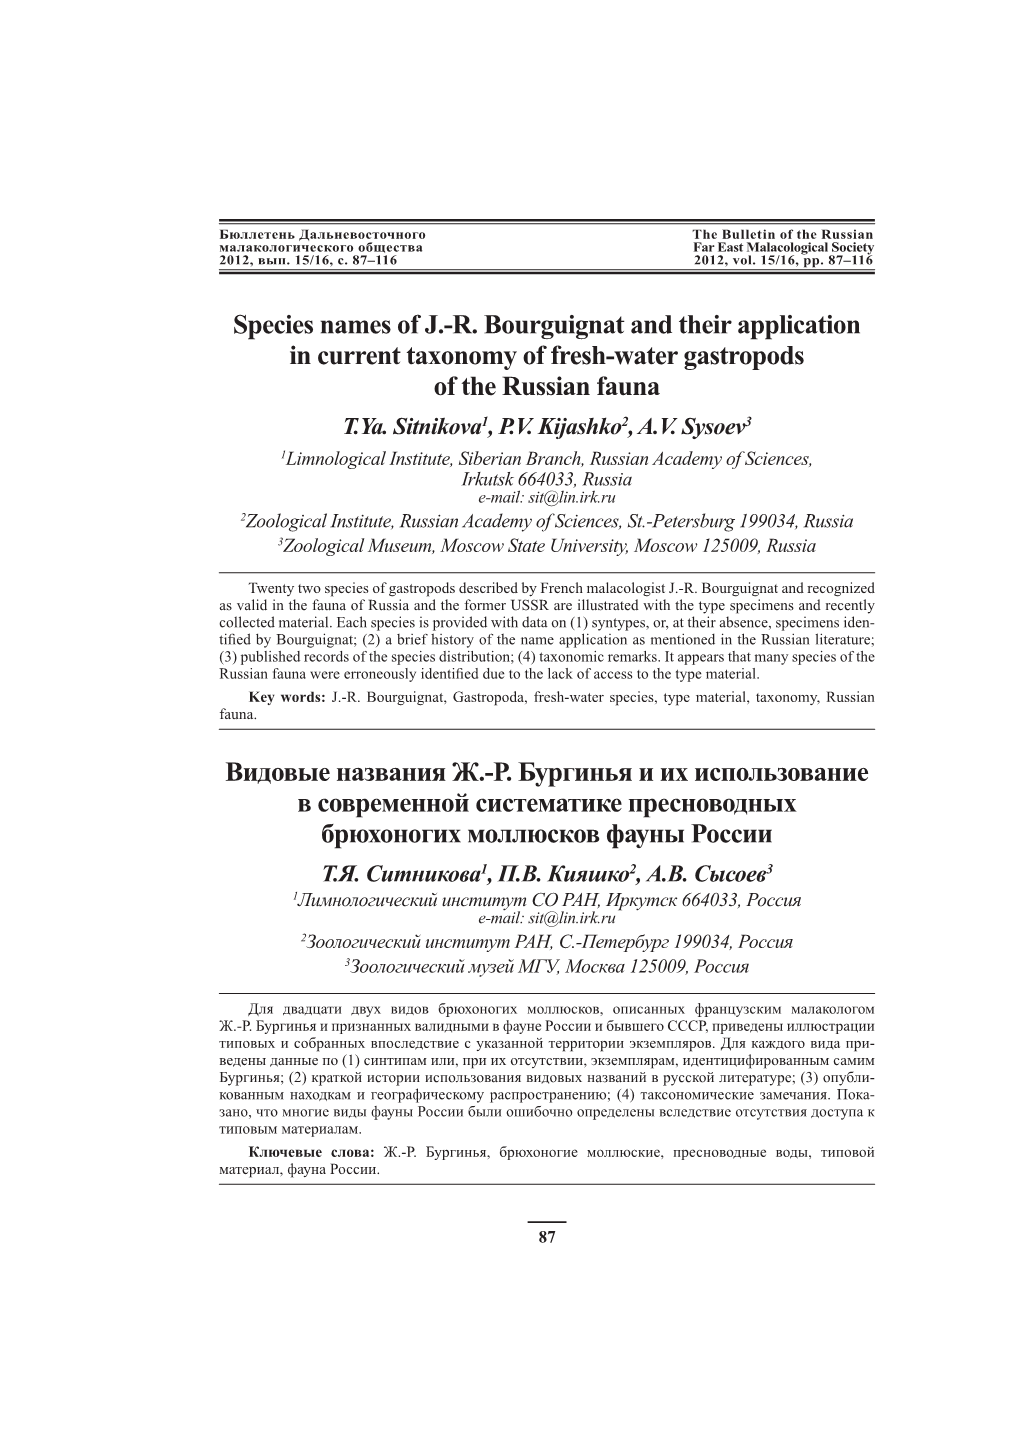 Species Names of J.-R. Bourguignat and Their Application in Current Taxonomy of Fresh-Water Gastropods of the Russian Fauna T.Ya